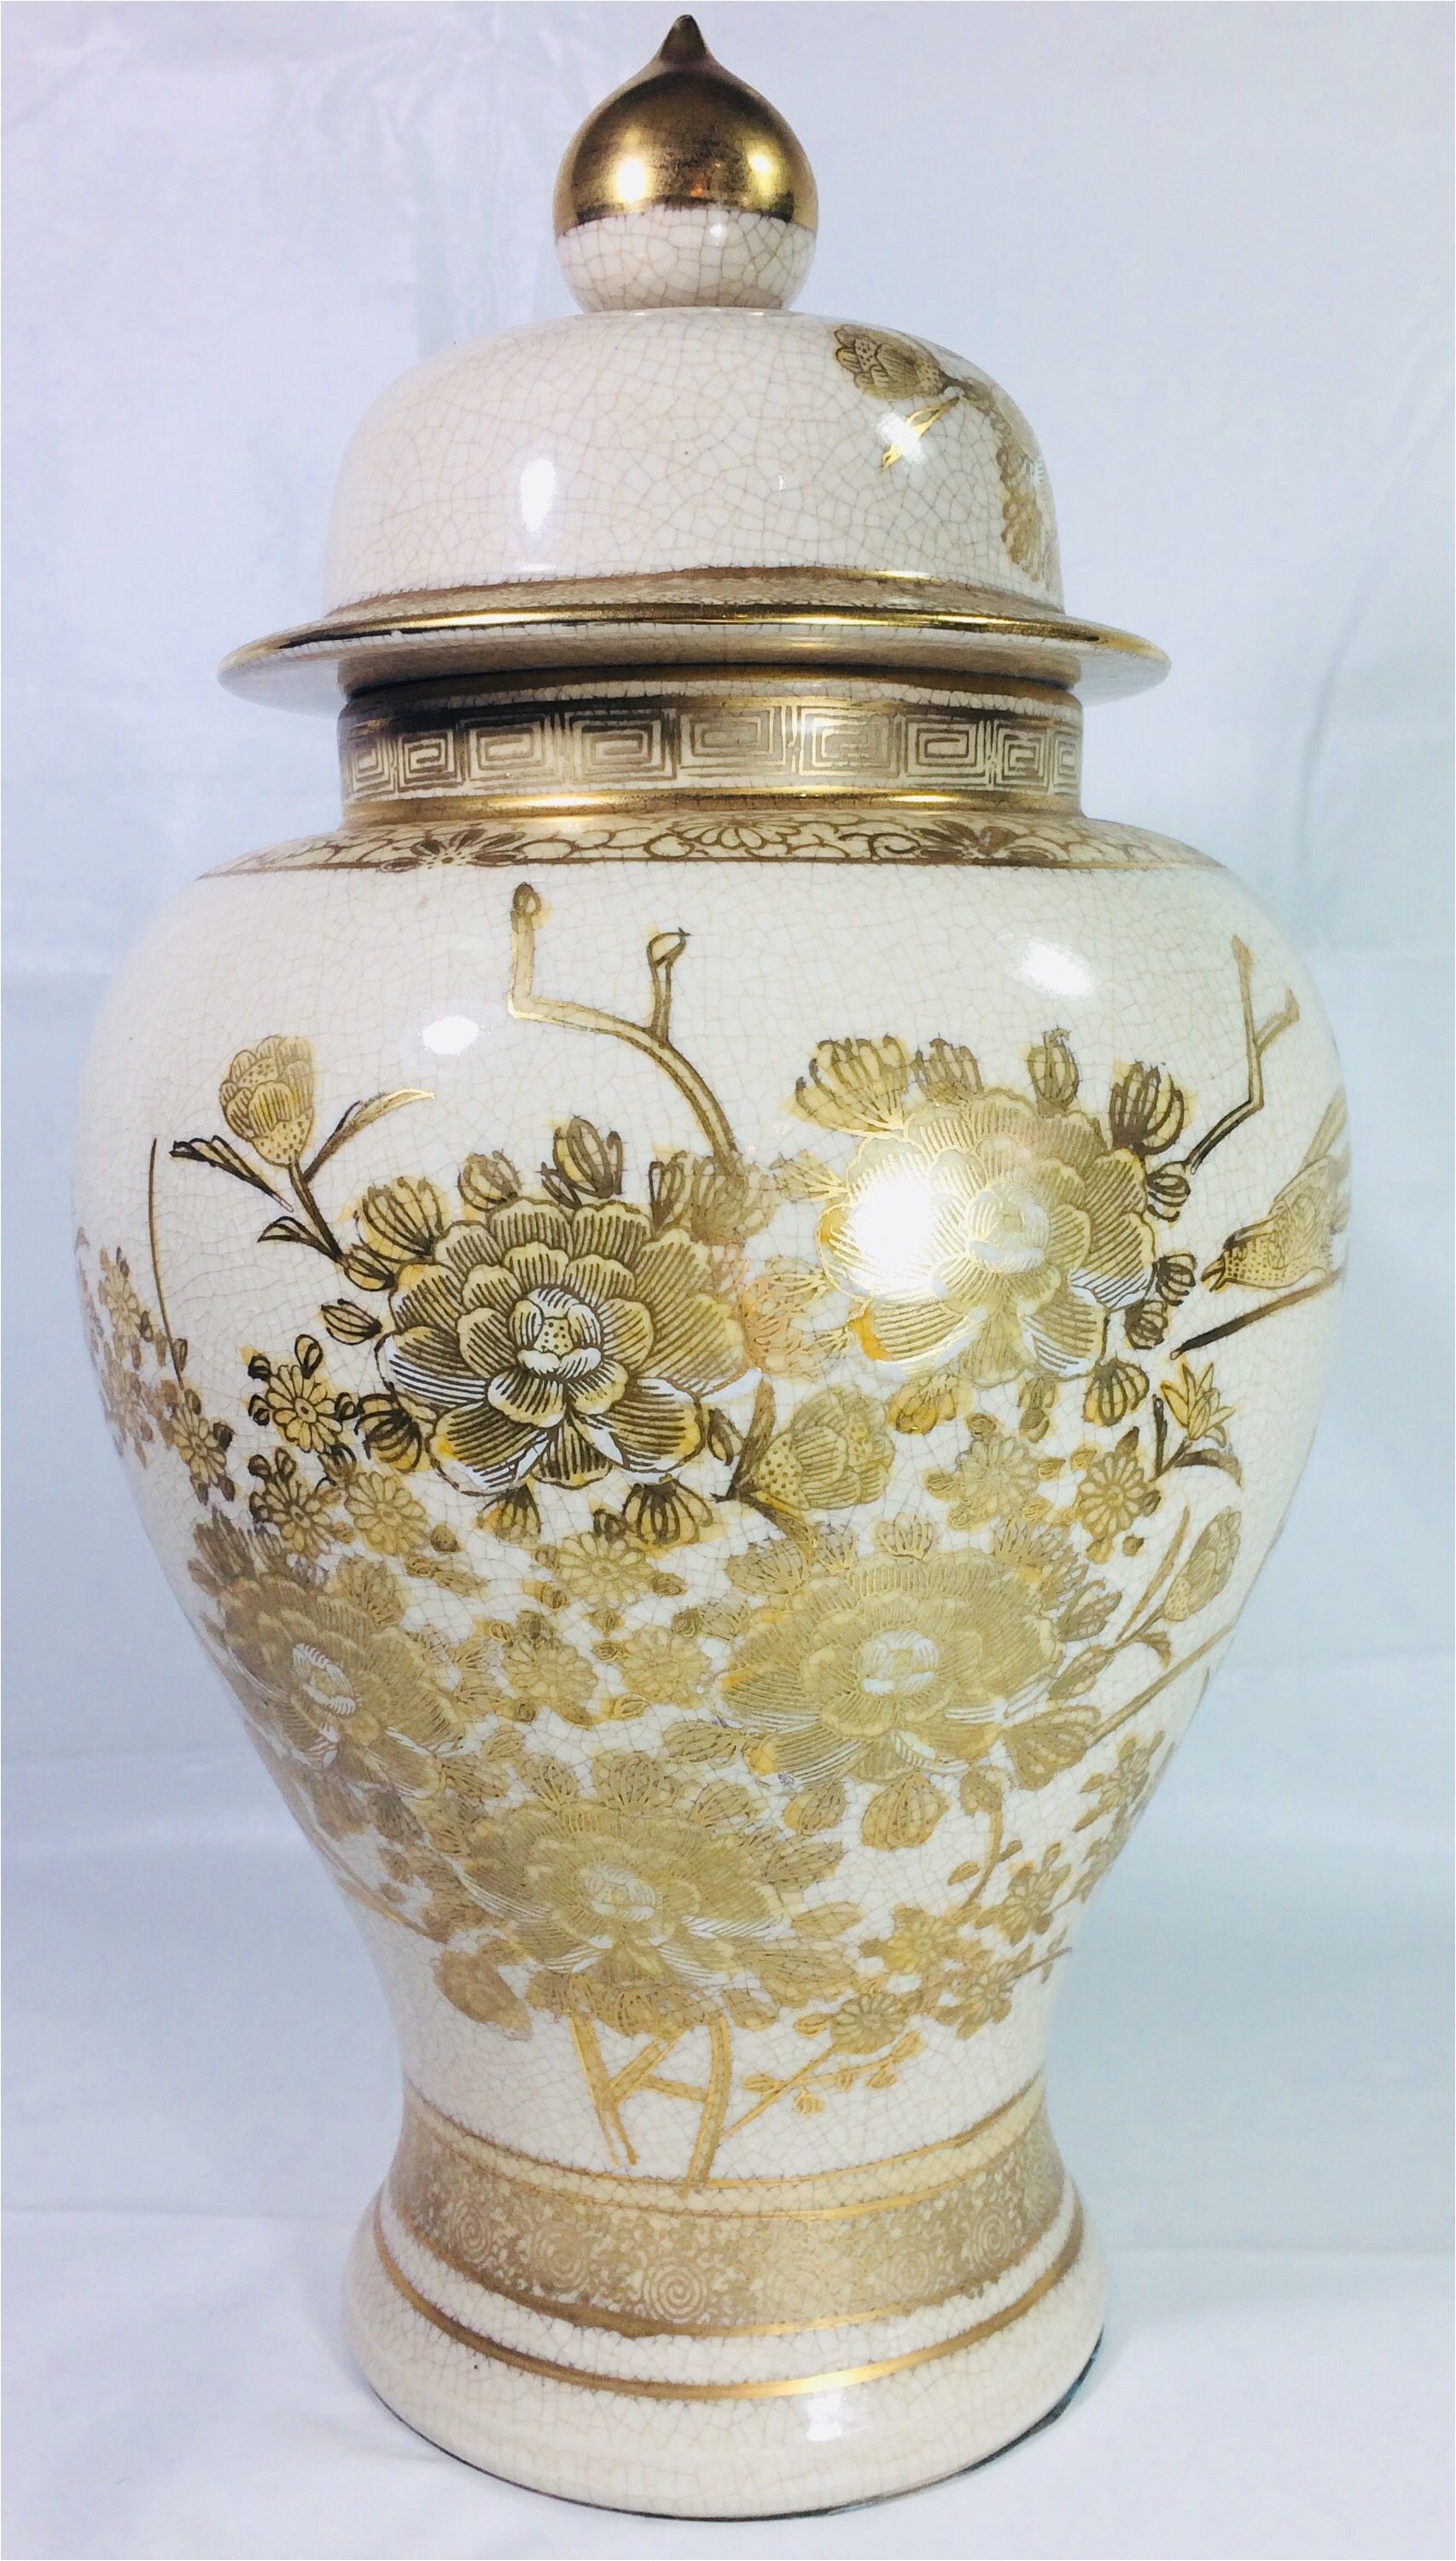 oriental urn vase hand painted asian oriental decor gilded urn hand painted vase decorative vase urn with lid by heirloomdecorshop on etsy